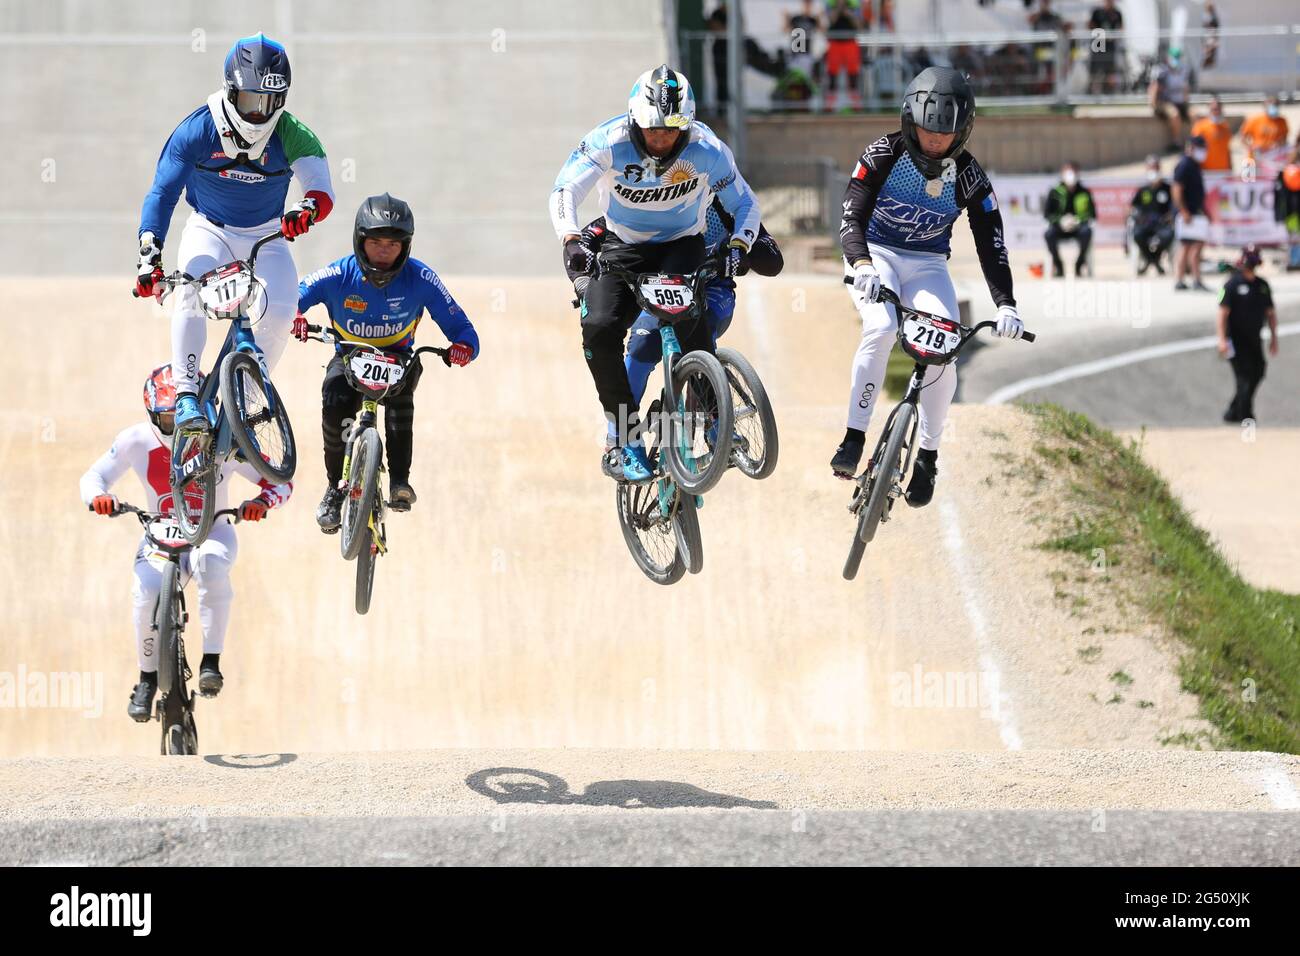 Giacomo FANTONI of Italy (117) and Dylan GOBERT of France (219) compete in the UCI BMX Supercross World Cup Round 1 at the BMX Olympic Arena on May 8t Stock Photo